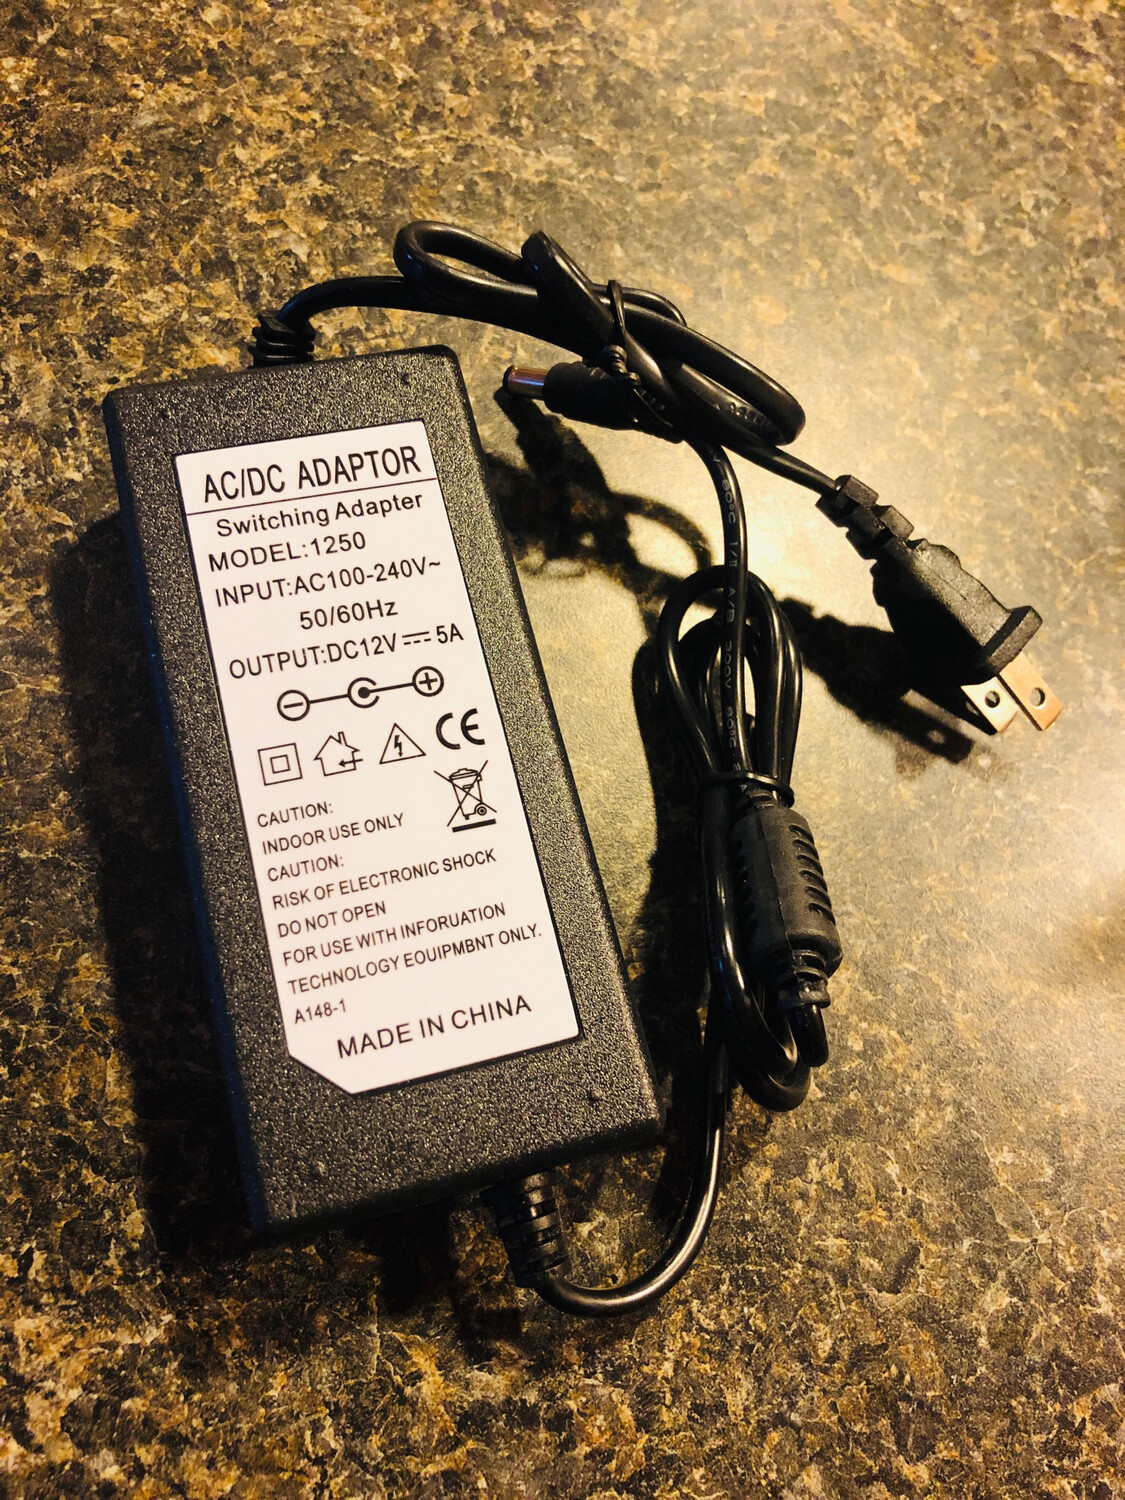 AtGames Legends Ultimate Power Supply - 110v Wall Plug Power 